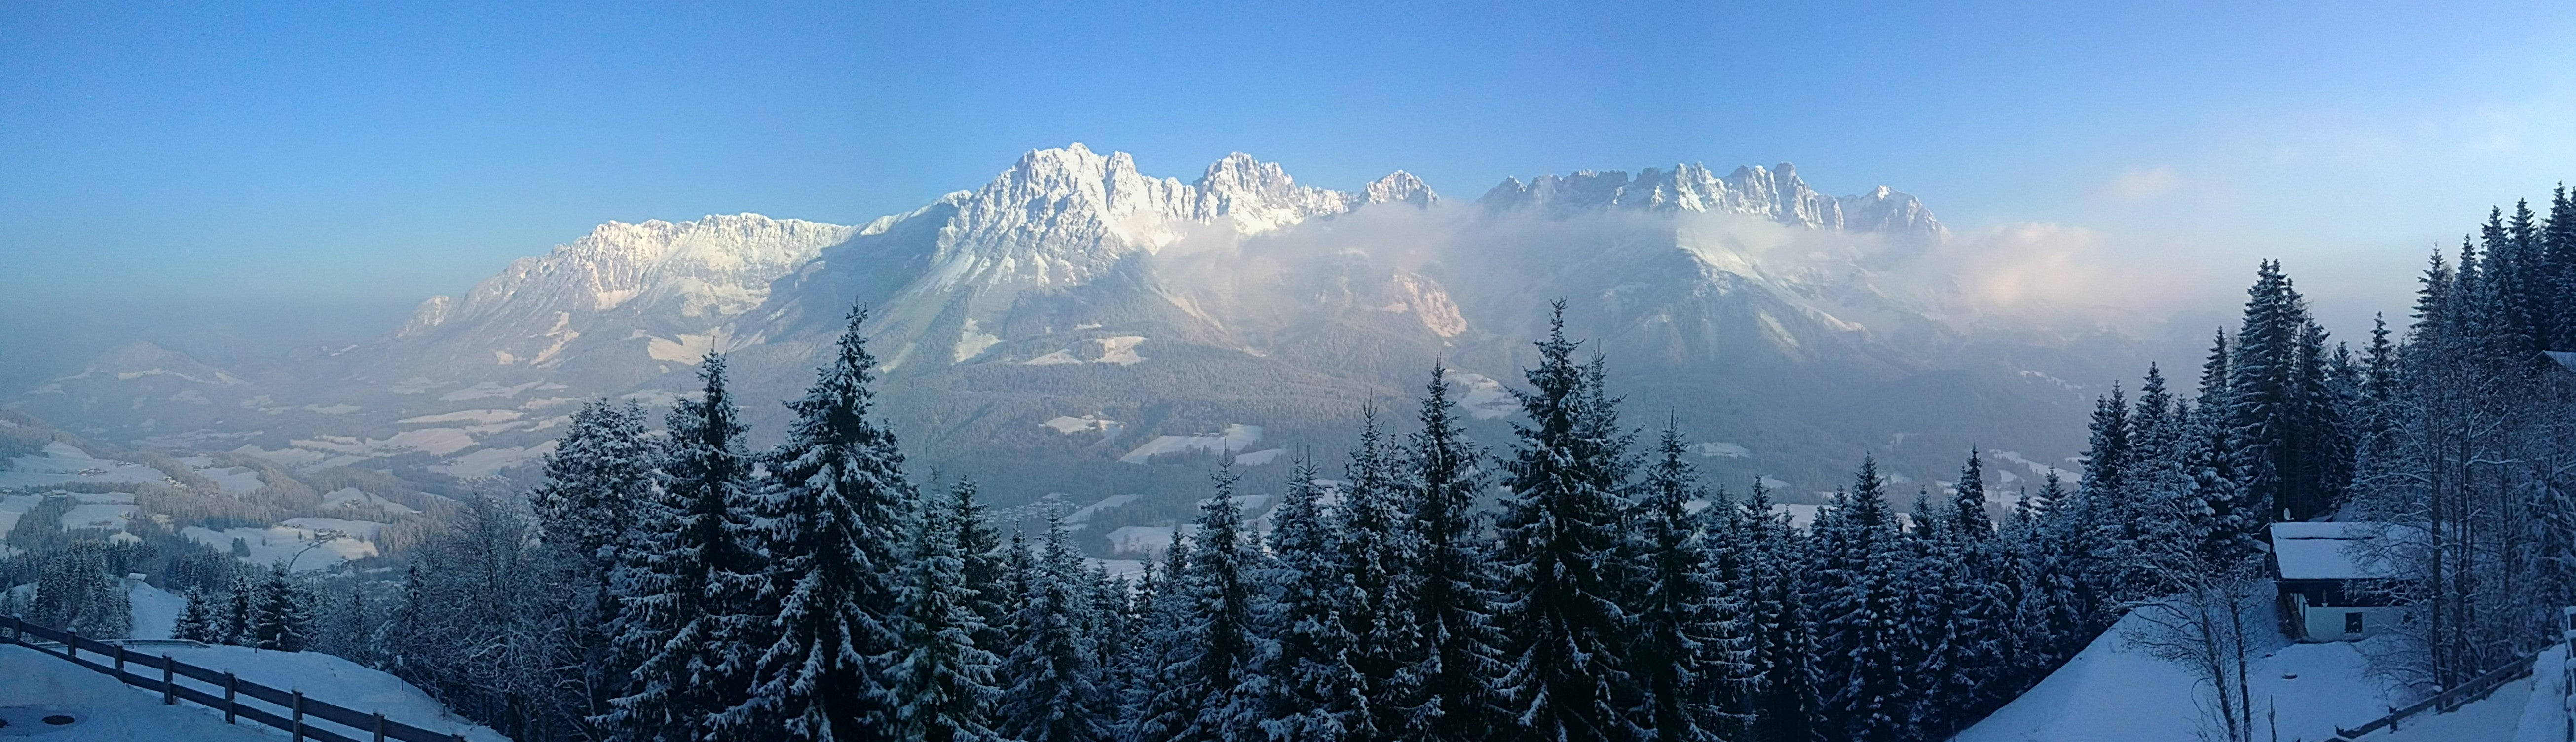 18. Anonymous - SE vivaz proAustrian mountains - Cool images, taken with your cell phone #4